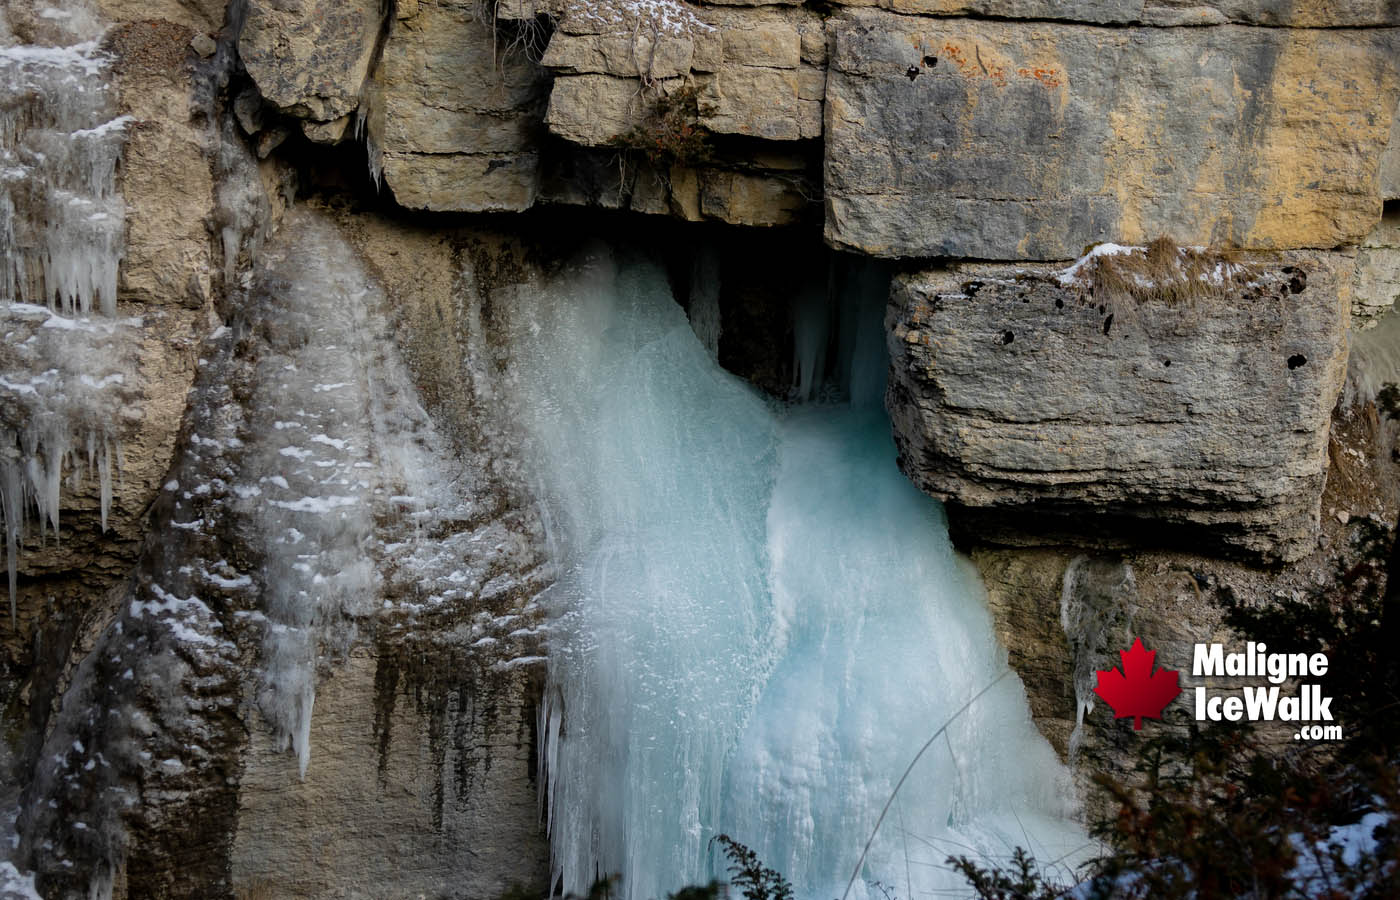 Frozen Water from Ice Caves Inside Maligne Canyon Ice Walk